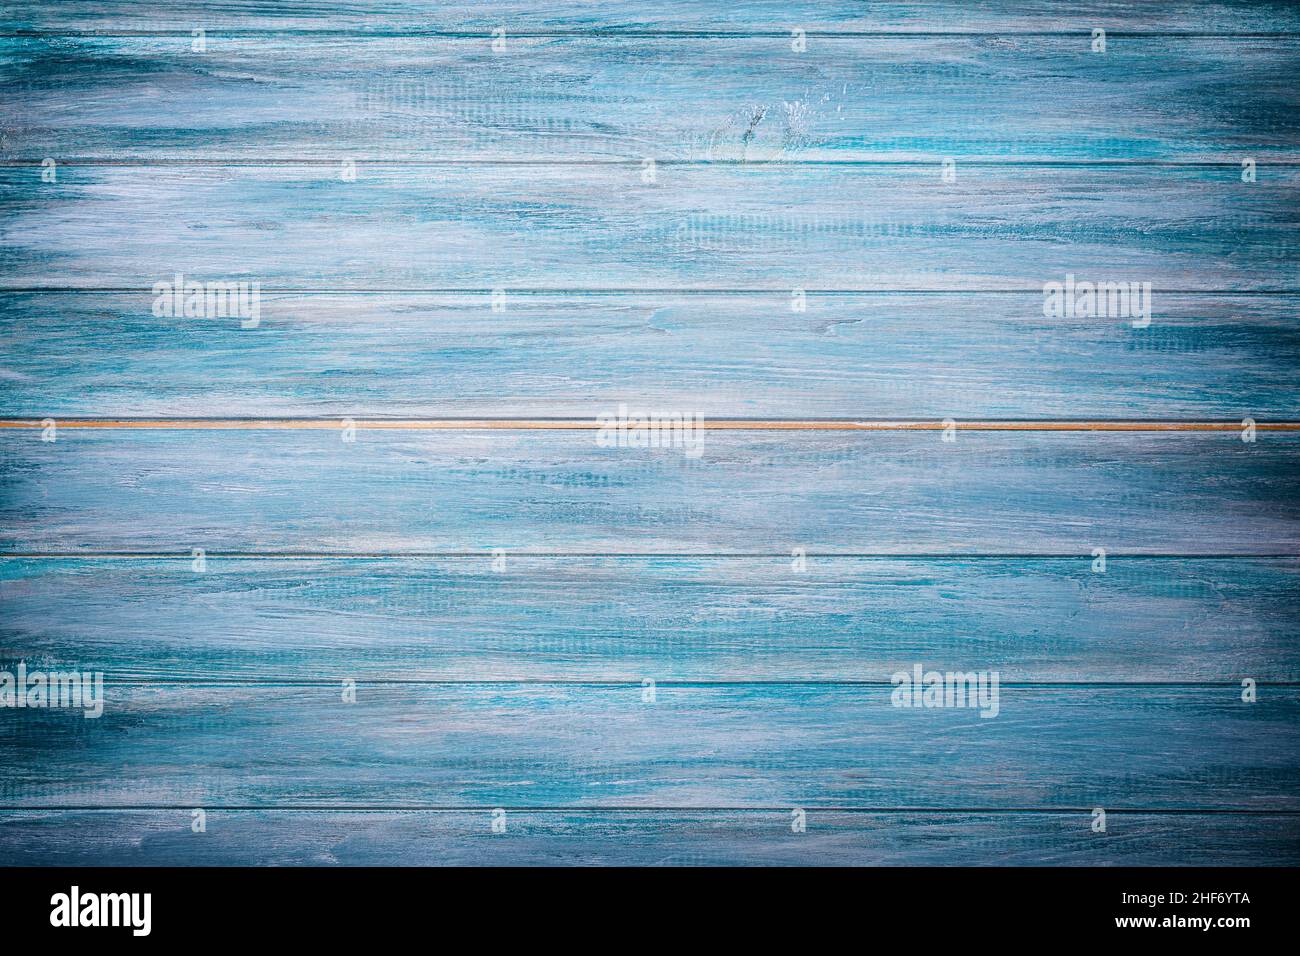 Textured white and turquoise wooden background with empty, free or copy space Stock Photo